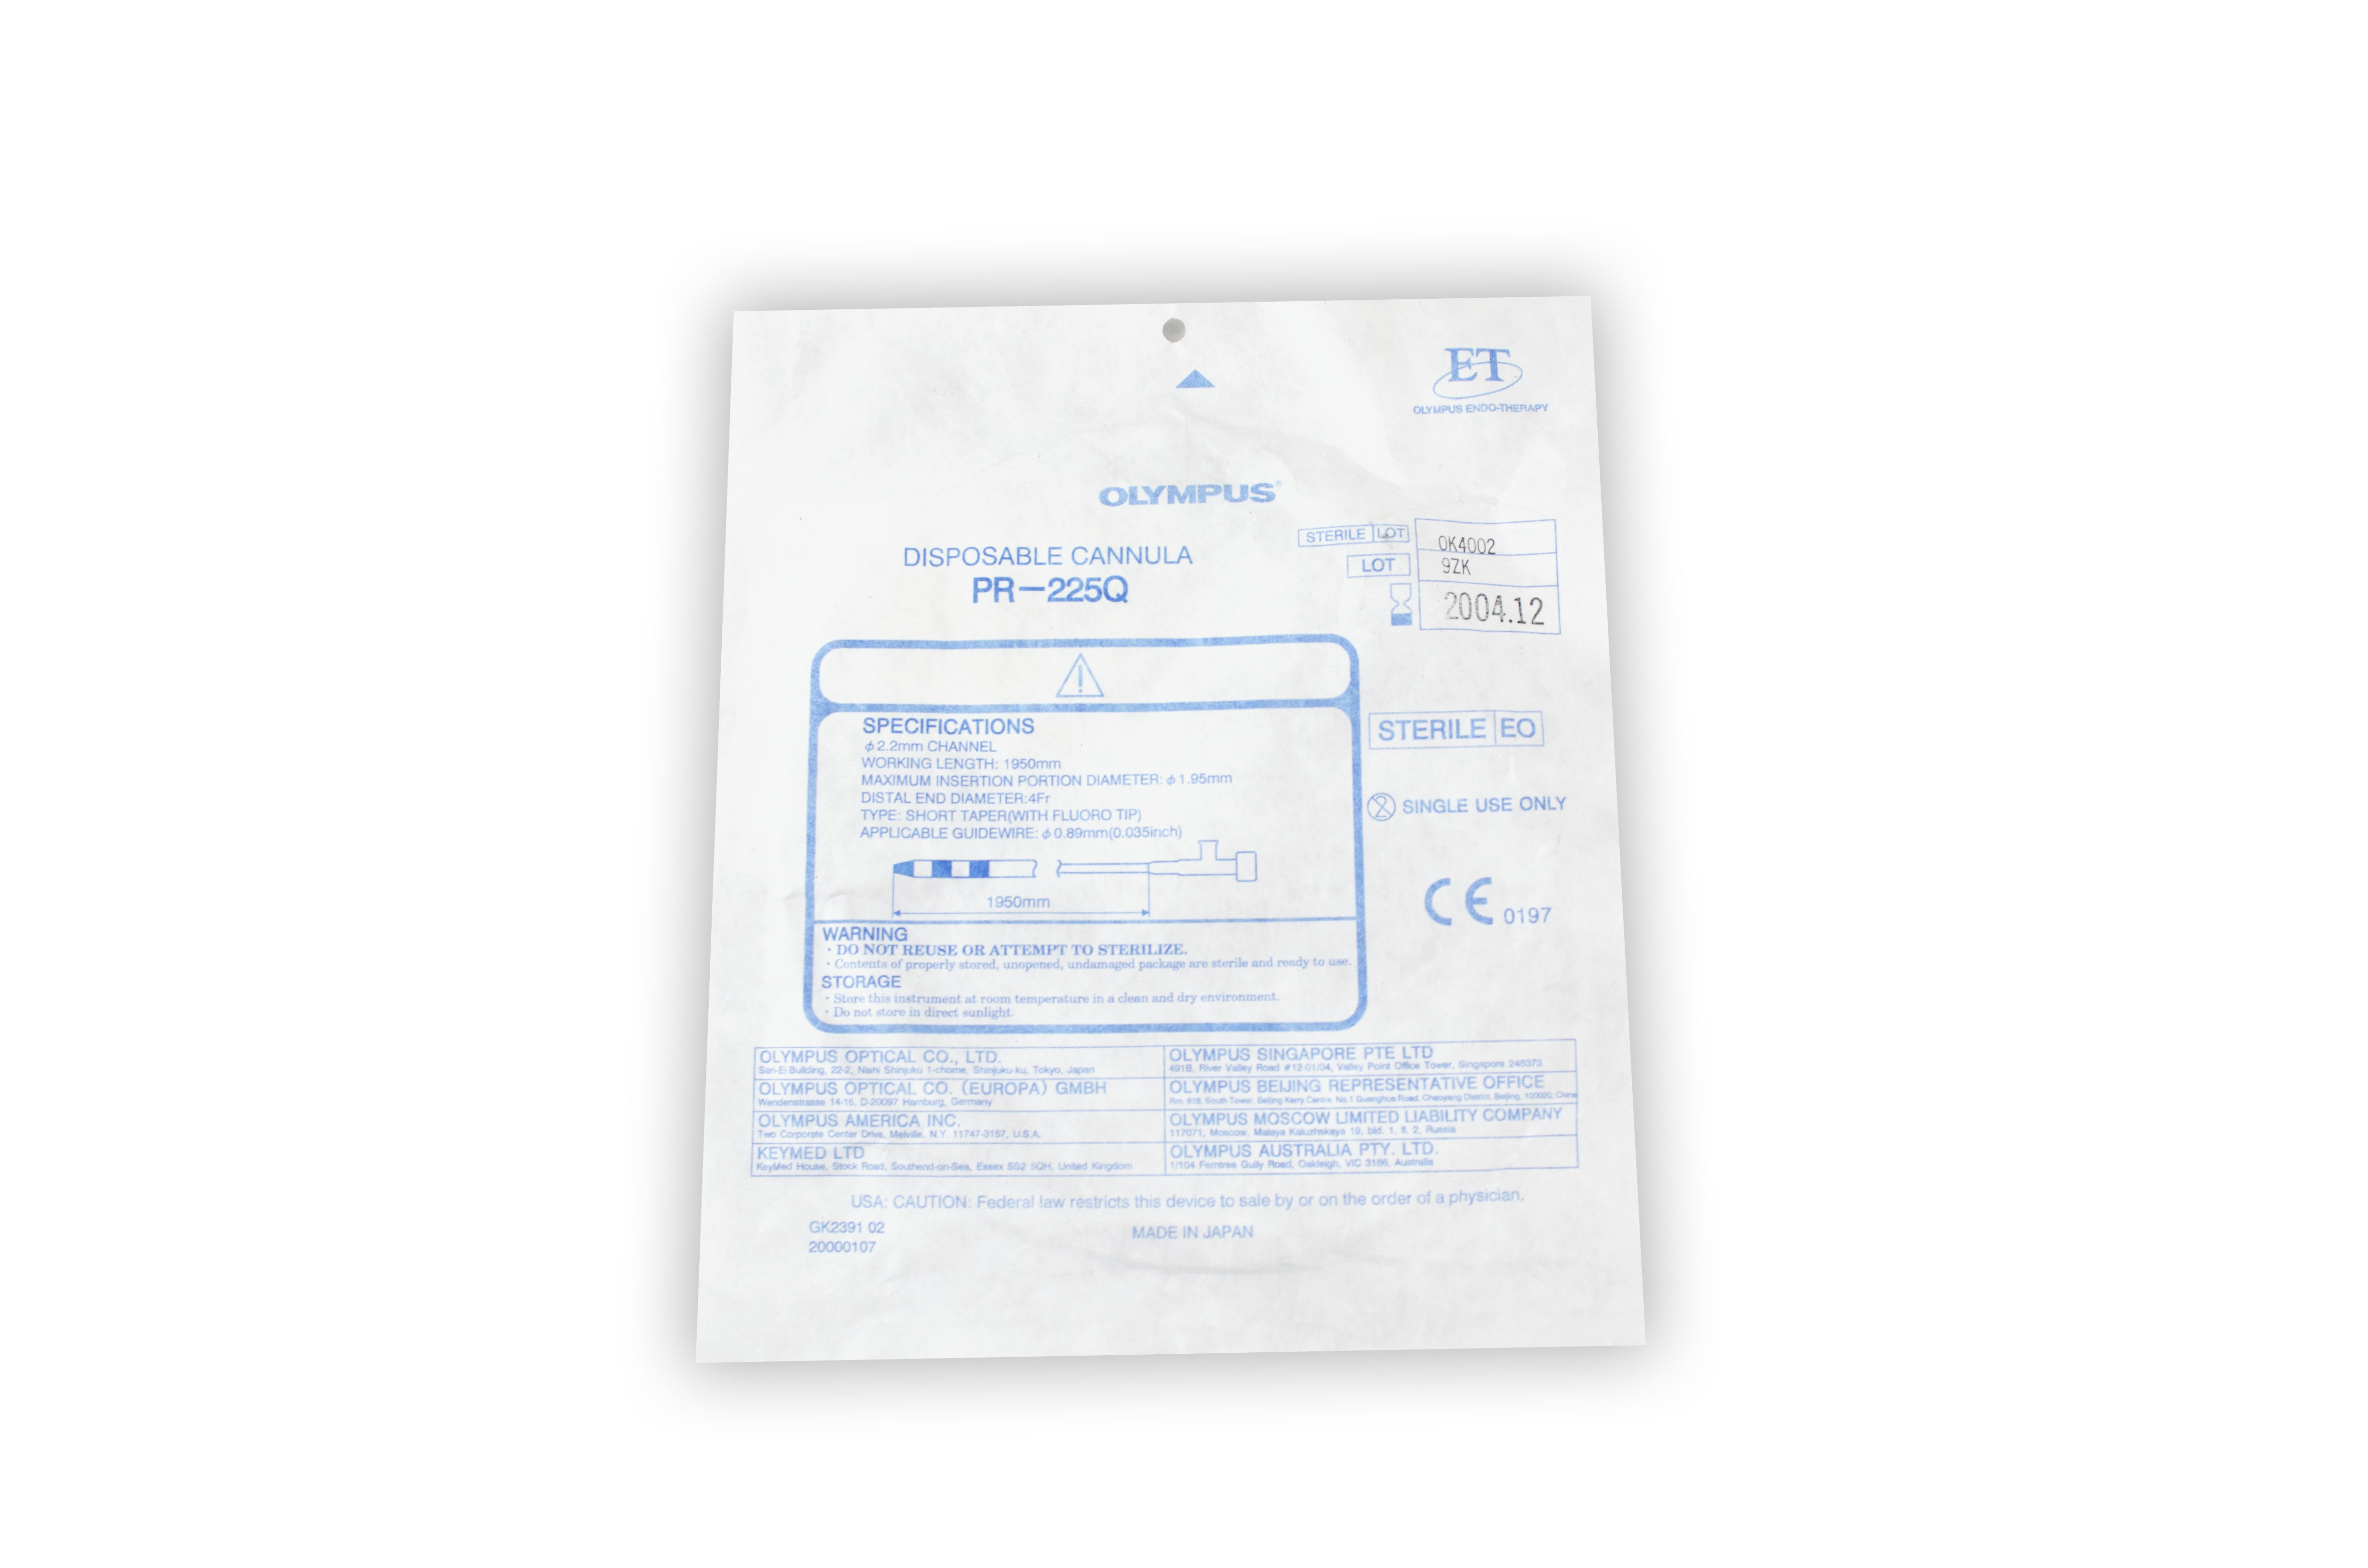 [Out-of-Date] Olympus Disposable Cannula - PR-225Q